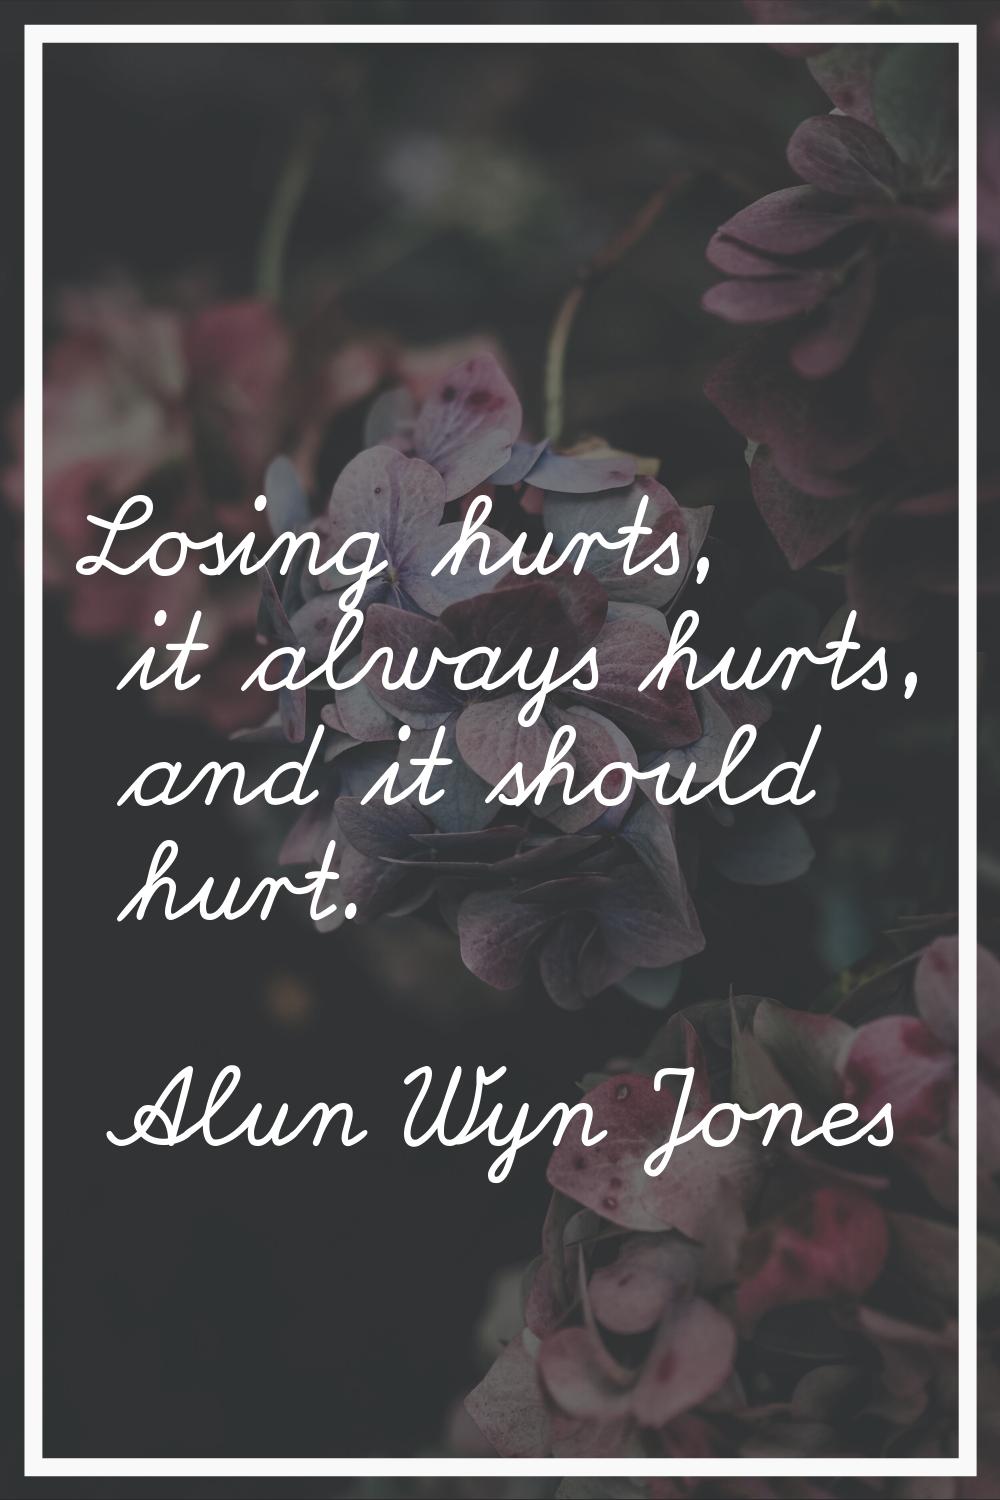 Losing hurts, it always hurts, and it should hurt.